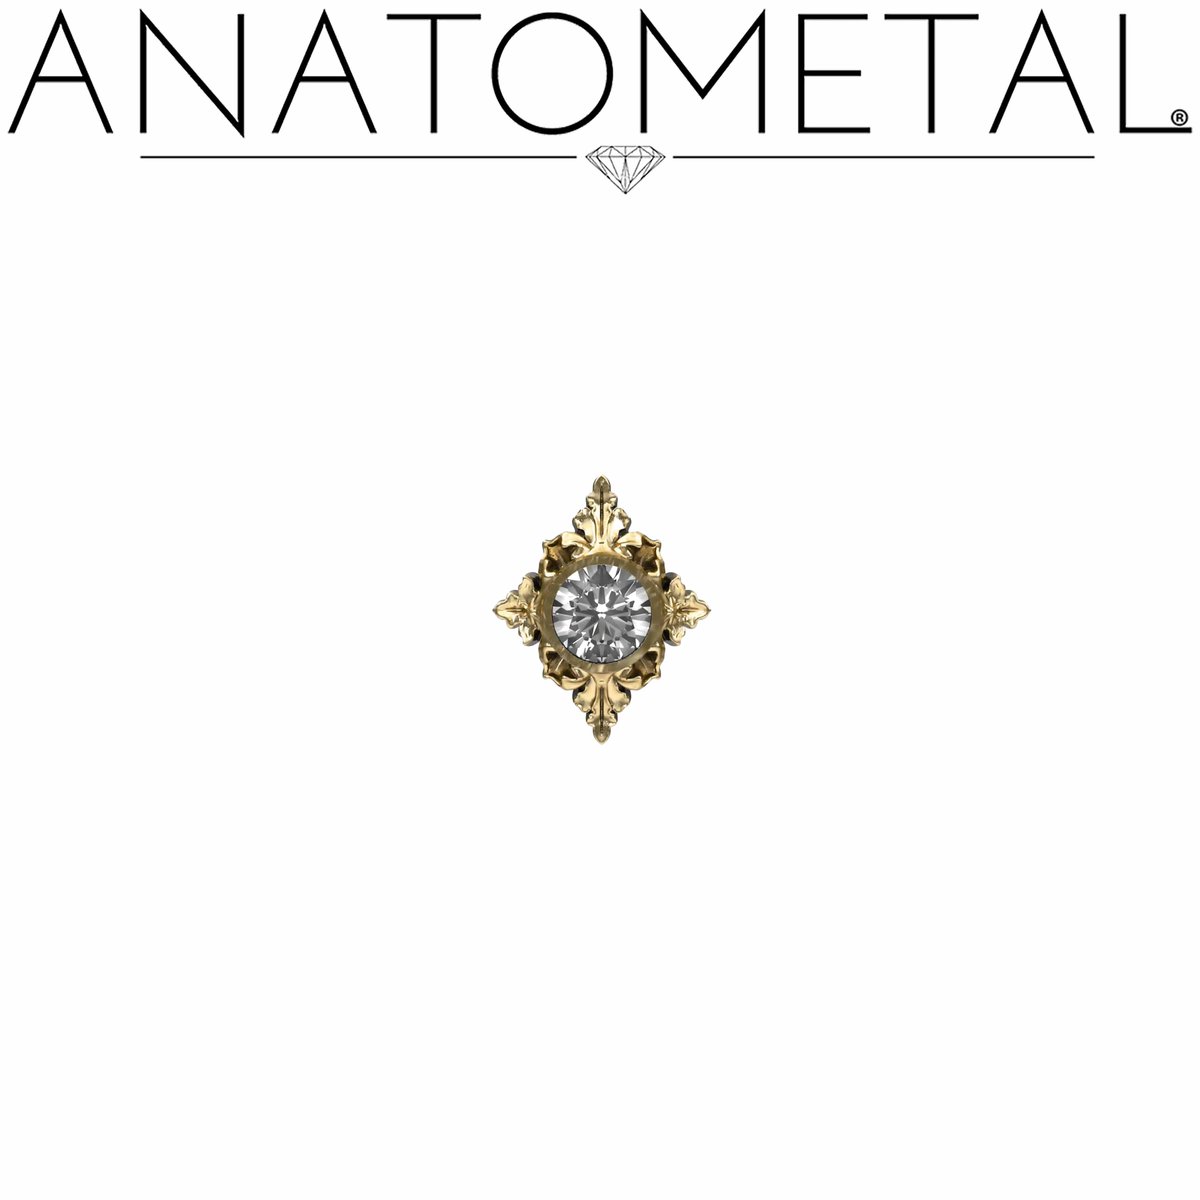 Embrace nature's finesse with the Manteca ends where lustrous gold leaves elegantly embrace a dazzling gemstone for a bloom of brilliance. 🌿✨💎 #Anatometal #18kGold #18KGoldbodyjewelry #Bodyjewelry #Safepiercings #GenuineGemstones #Customjewelry